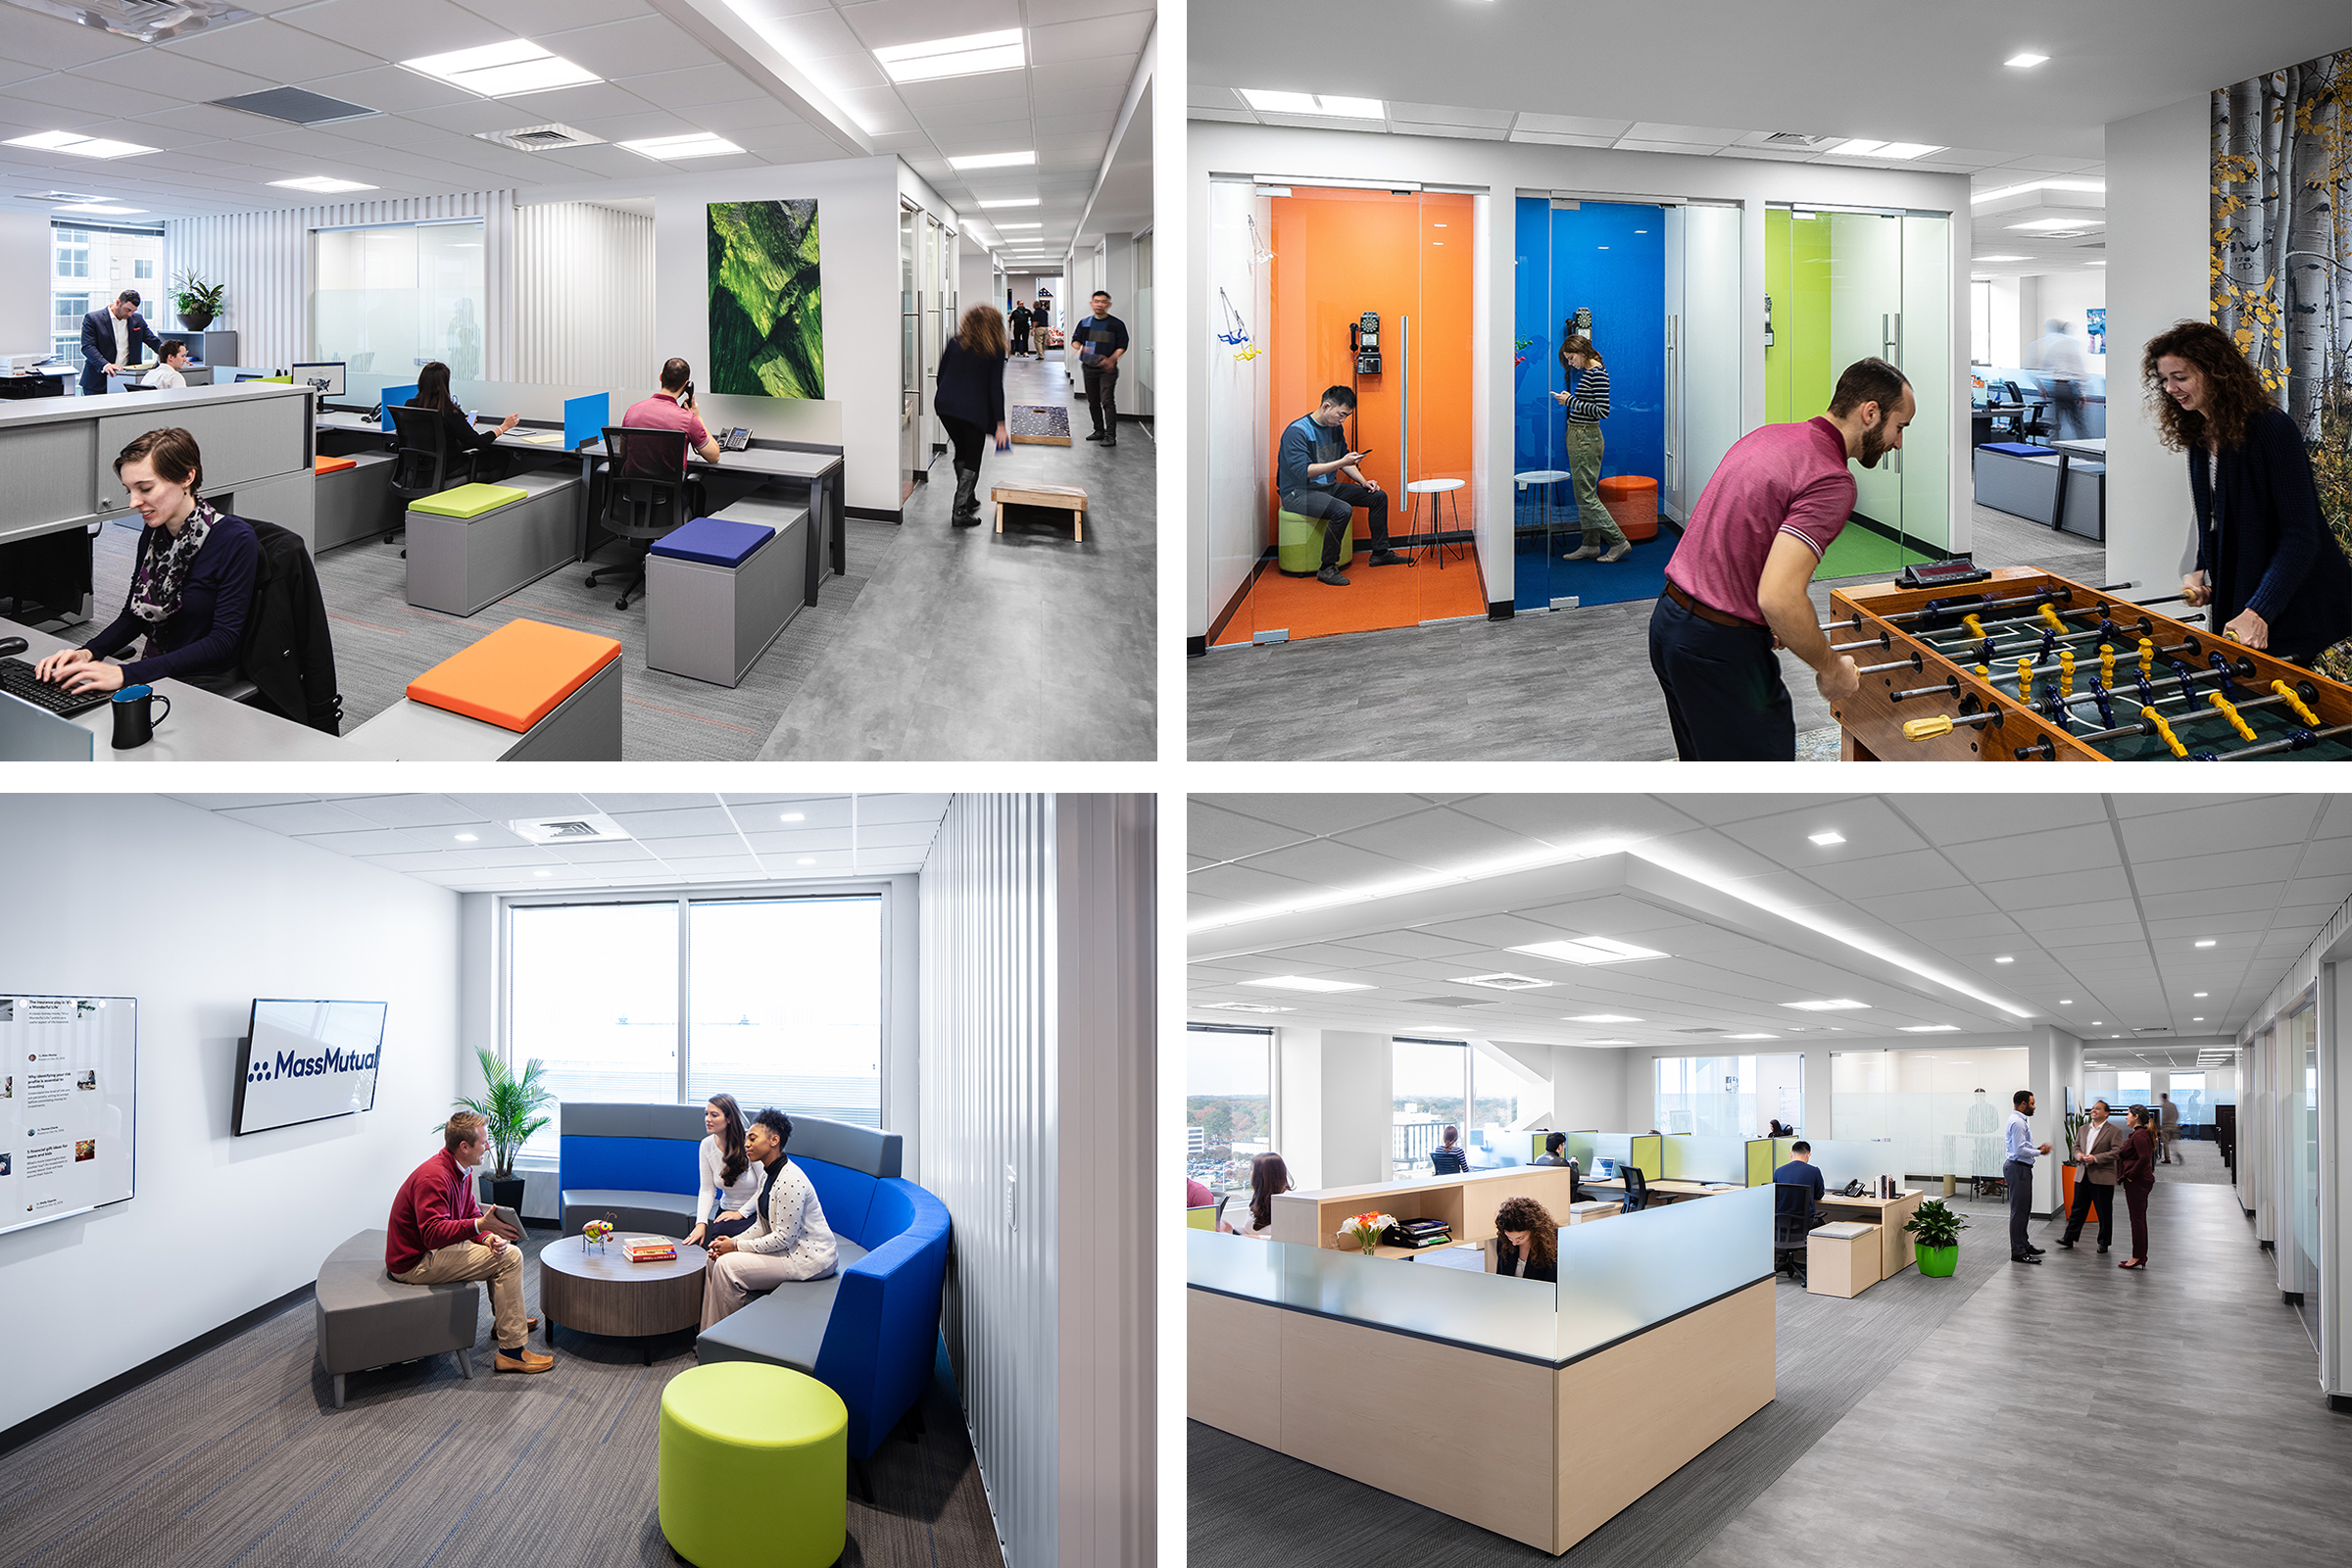 Designed by Clark Nexsen, the new Mass Mutual office features a variety of spaces to meet diverse work styles and generational preferences. Photos by Keith Isaacs.